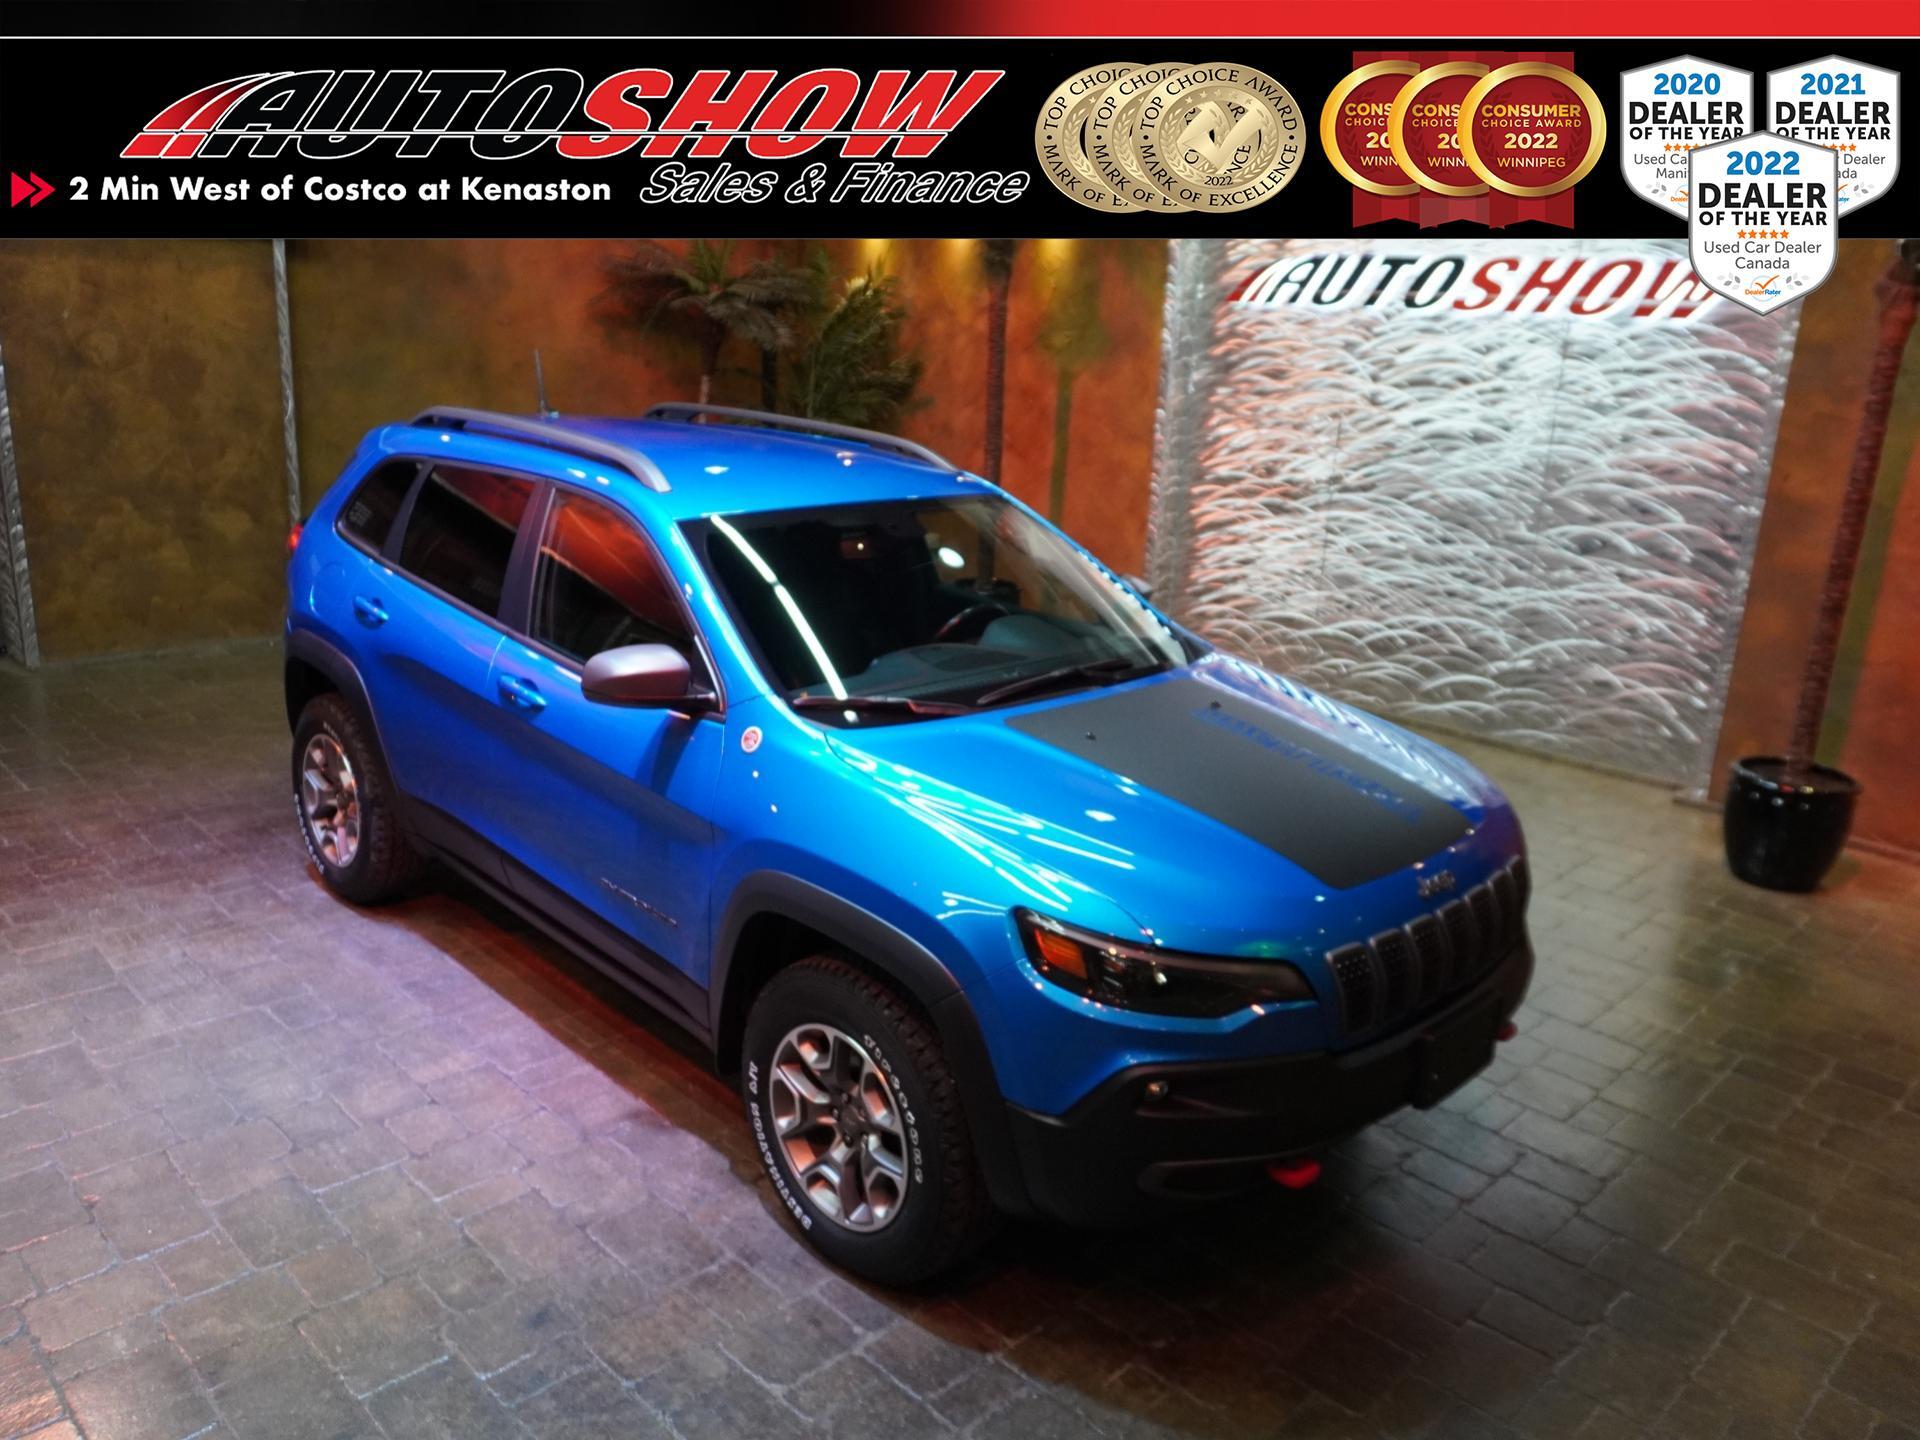 2021 Jeep Cherokee Trailhawk - Htd Lthr Seats & Whl, Tow Pkg, 8.4in S